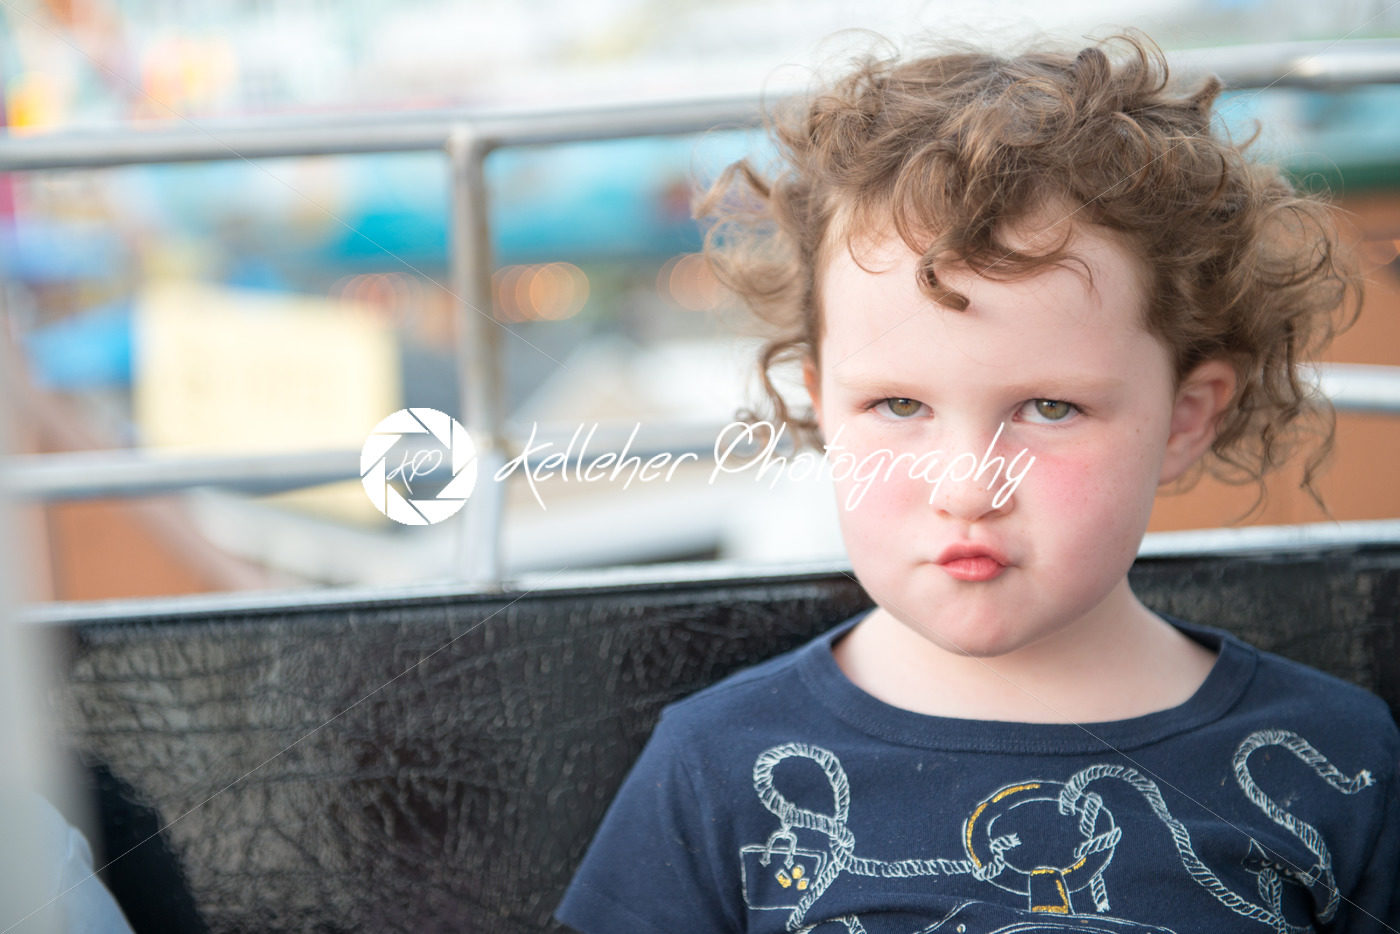 Young girl on boardwalk amusement ride ferris wheel with pouting expression on face - Kelleher Photography Store